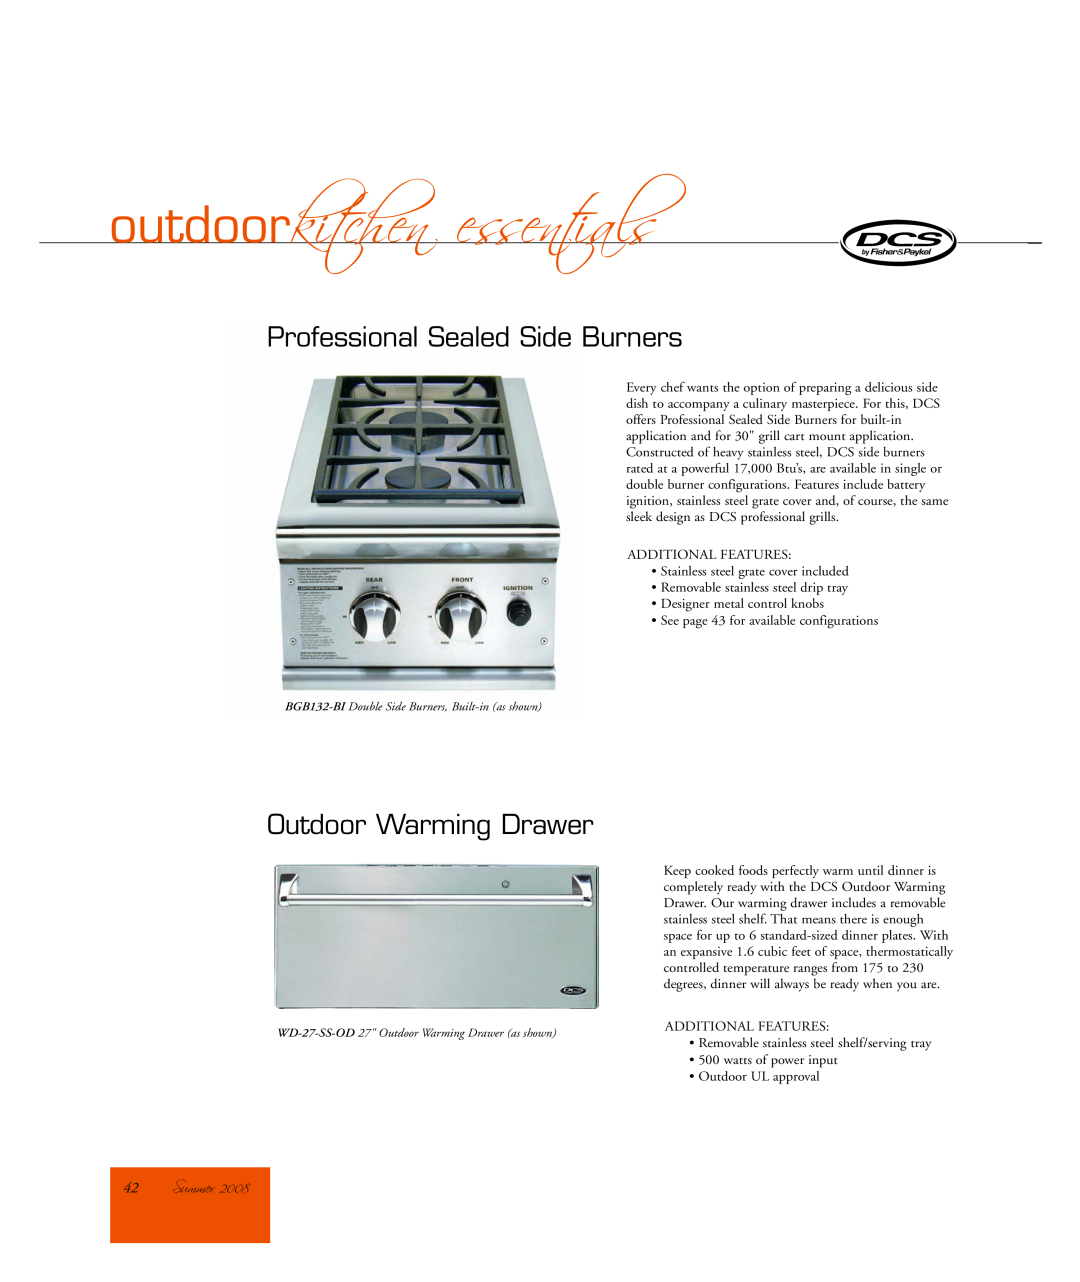 DCS WD-27-SS-OD manual Summer, outdoorkitchen essentials, Professional Sealed Side Burners, Outdoor Warming Drawer 